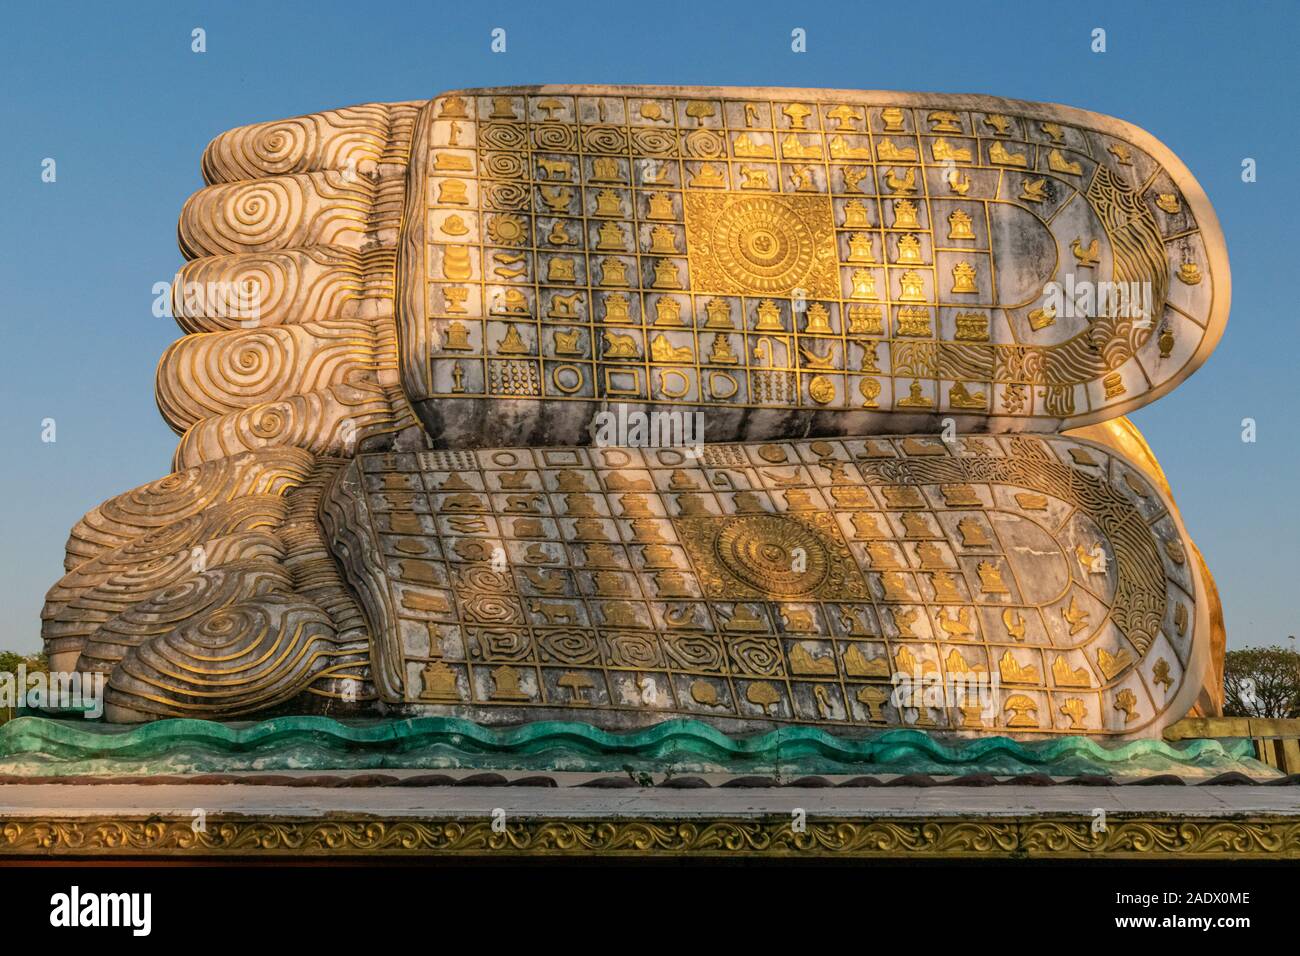 Giant reclining Buddha statue in Bago, Myanmar - close-up of the intrinsicly decorated feet of the statue. Stock Photo